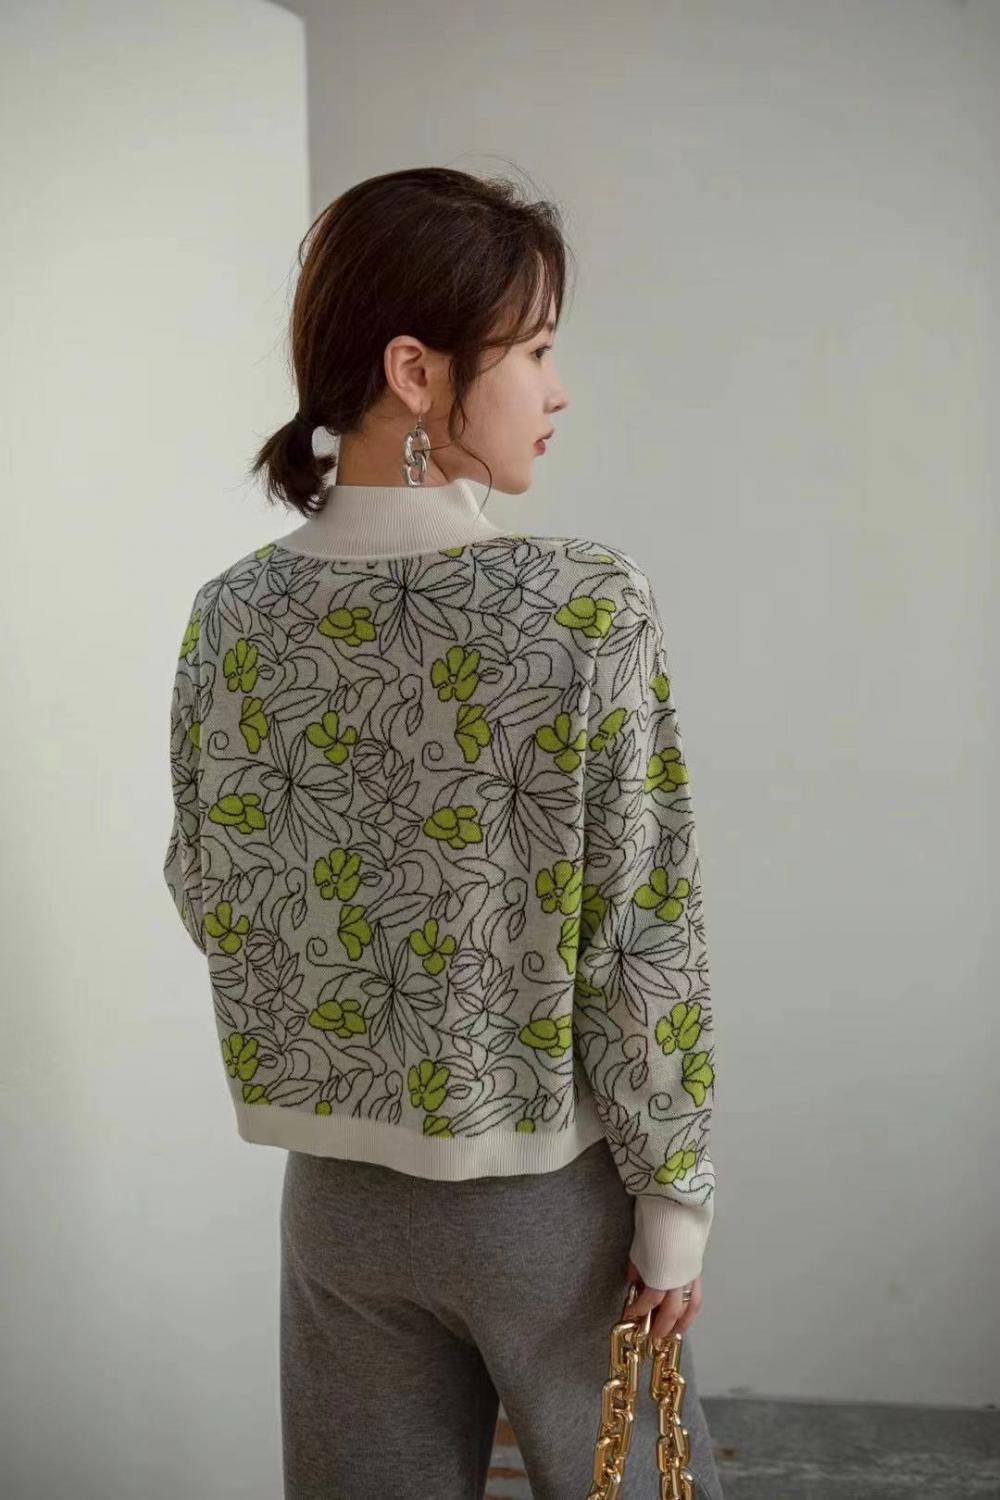 Autumn wool embroidered knit sweater cardigan coat